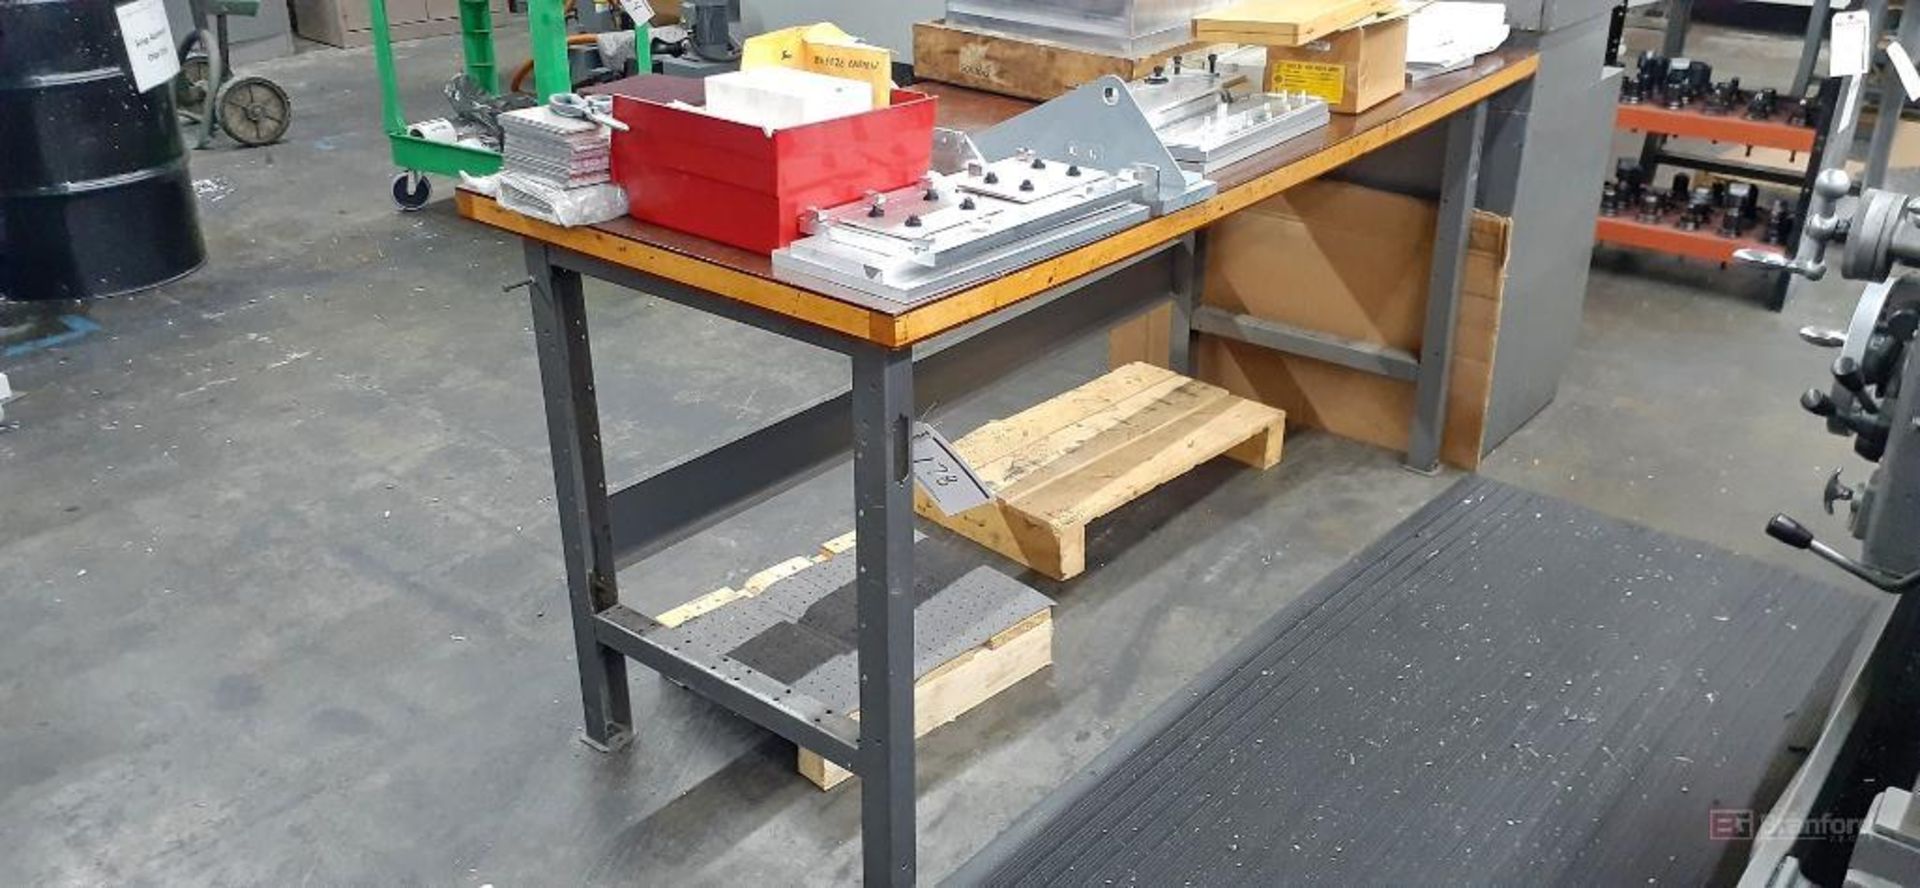 (3) Steel Framed Wood Top Work Benches